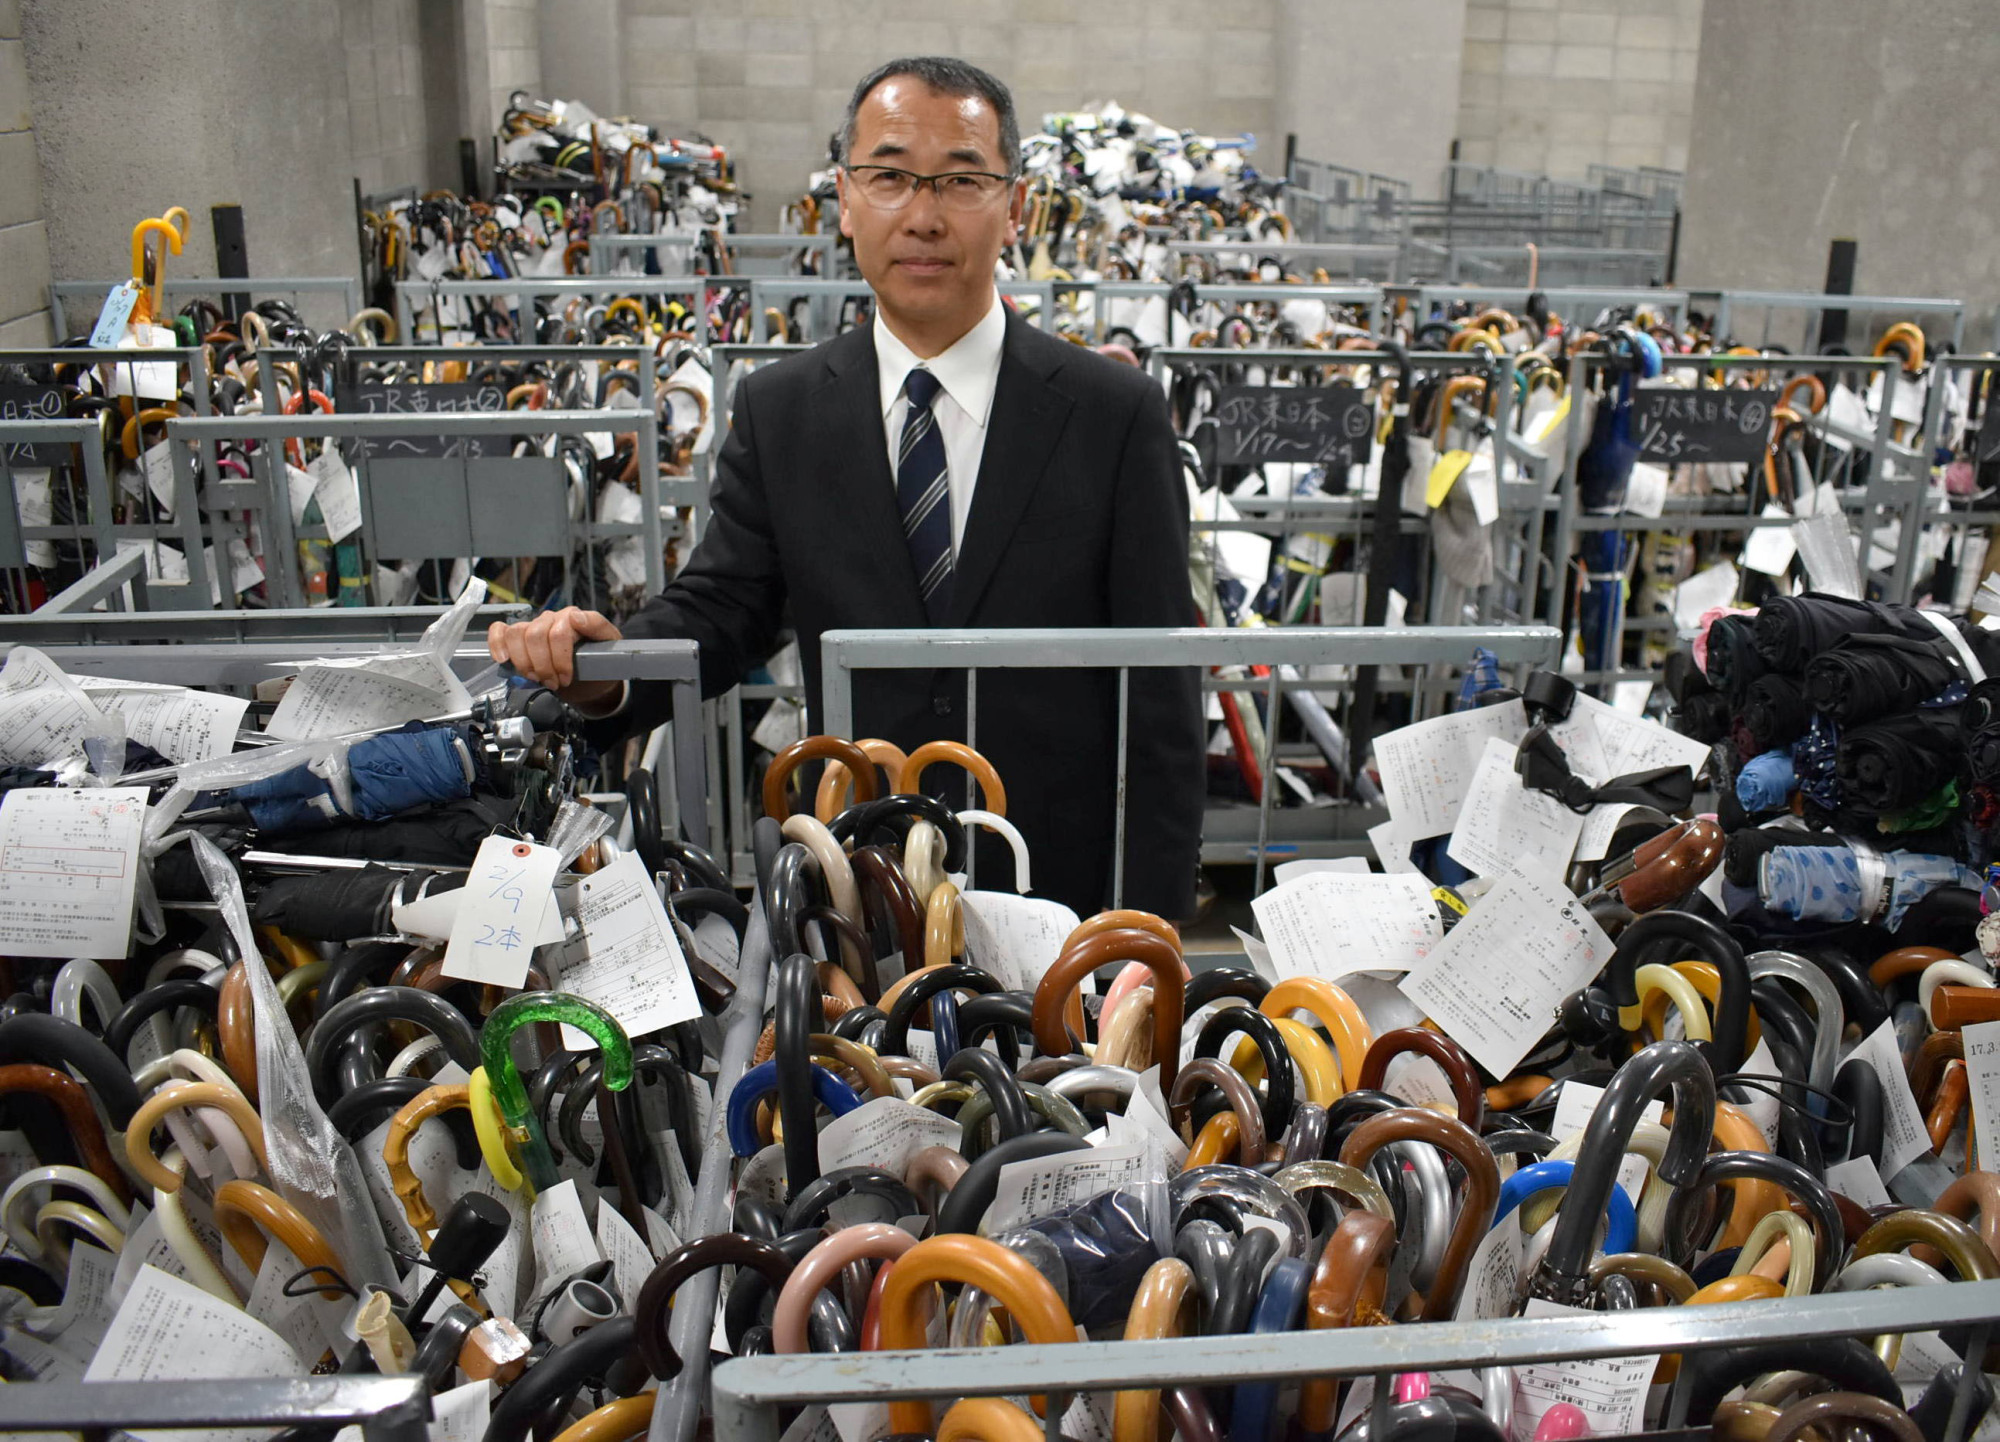 Shoji Okubo, head of the Metropolitan Police Department's lost and found center in Bunkyo Ward, stands with umbrellas that are waiting to be claimed by their owner. | SATOKO KAWASAKI